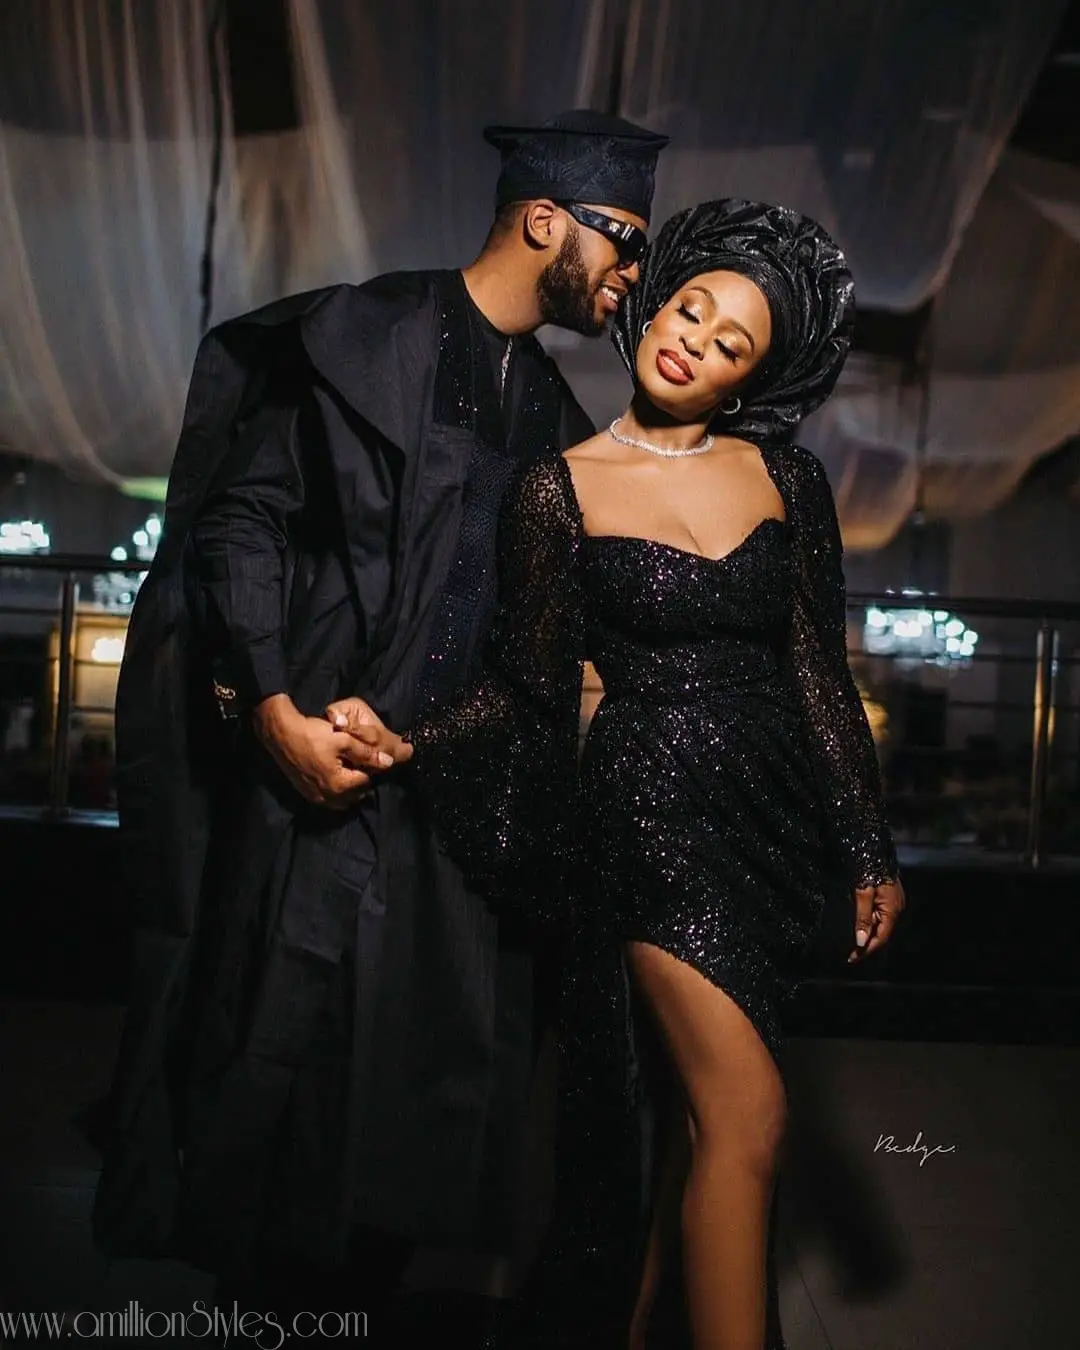 Can You Wear Black Matching Outfits For Your Pre-Wedding Photos?